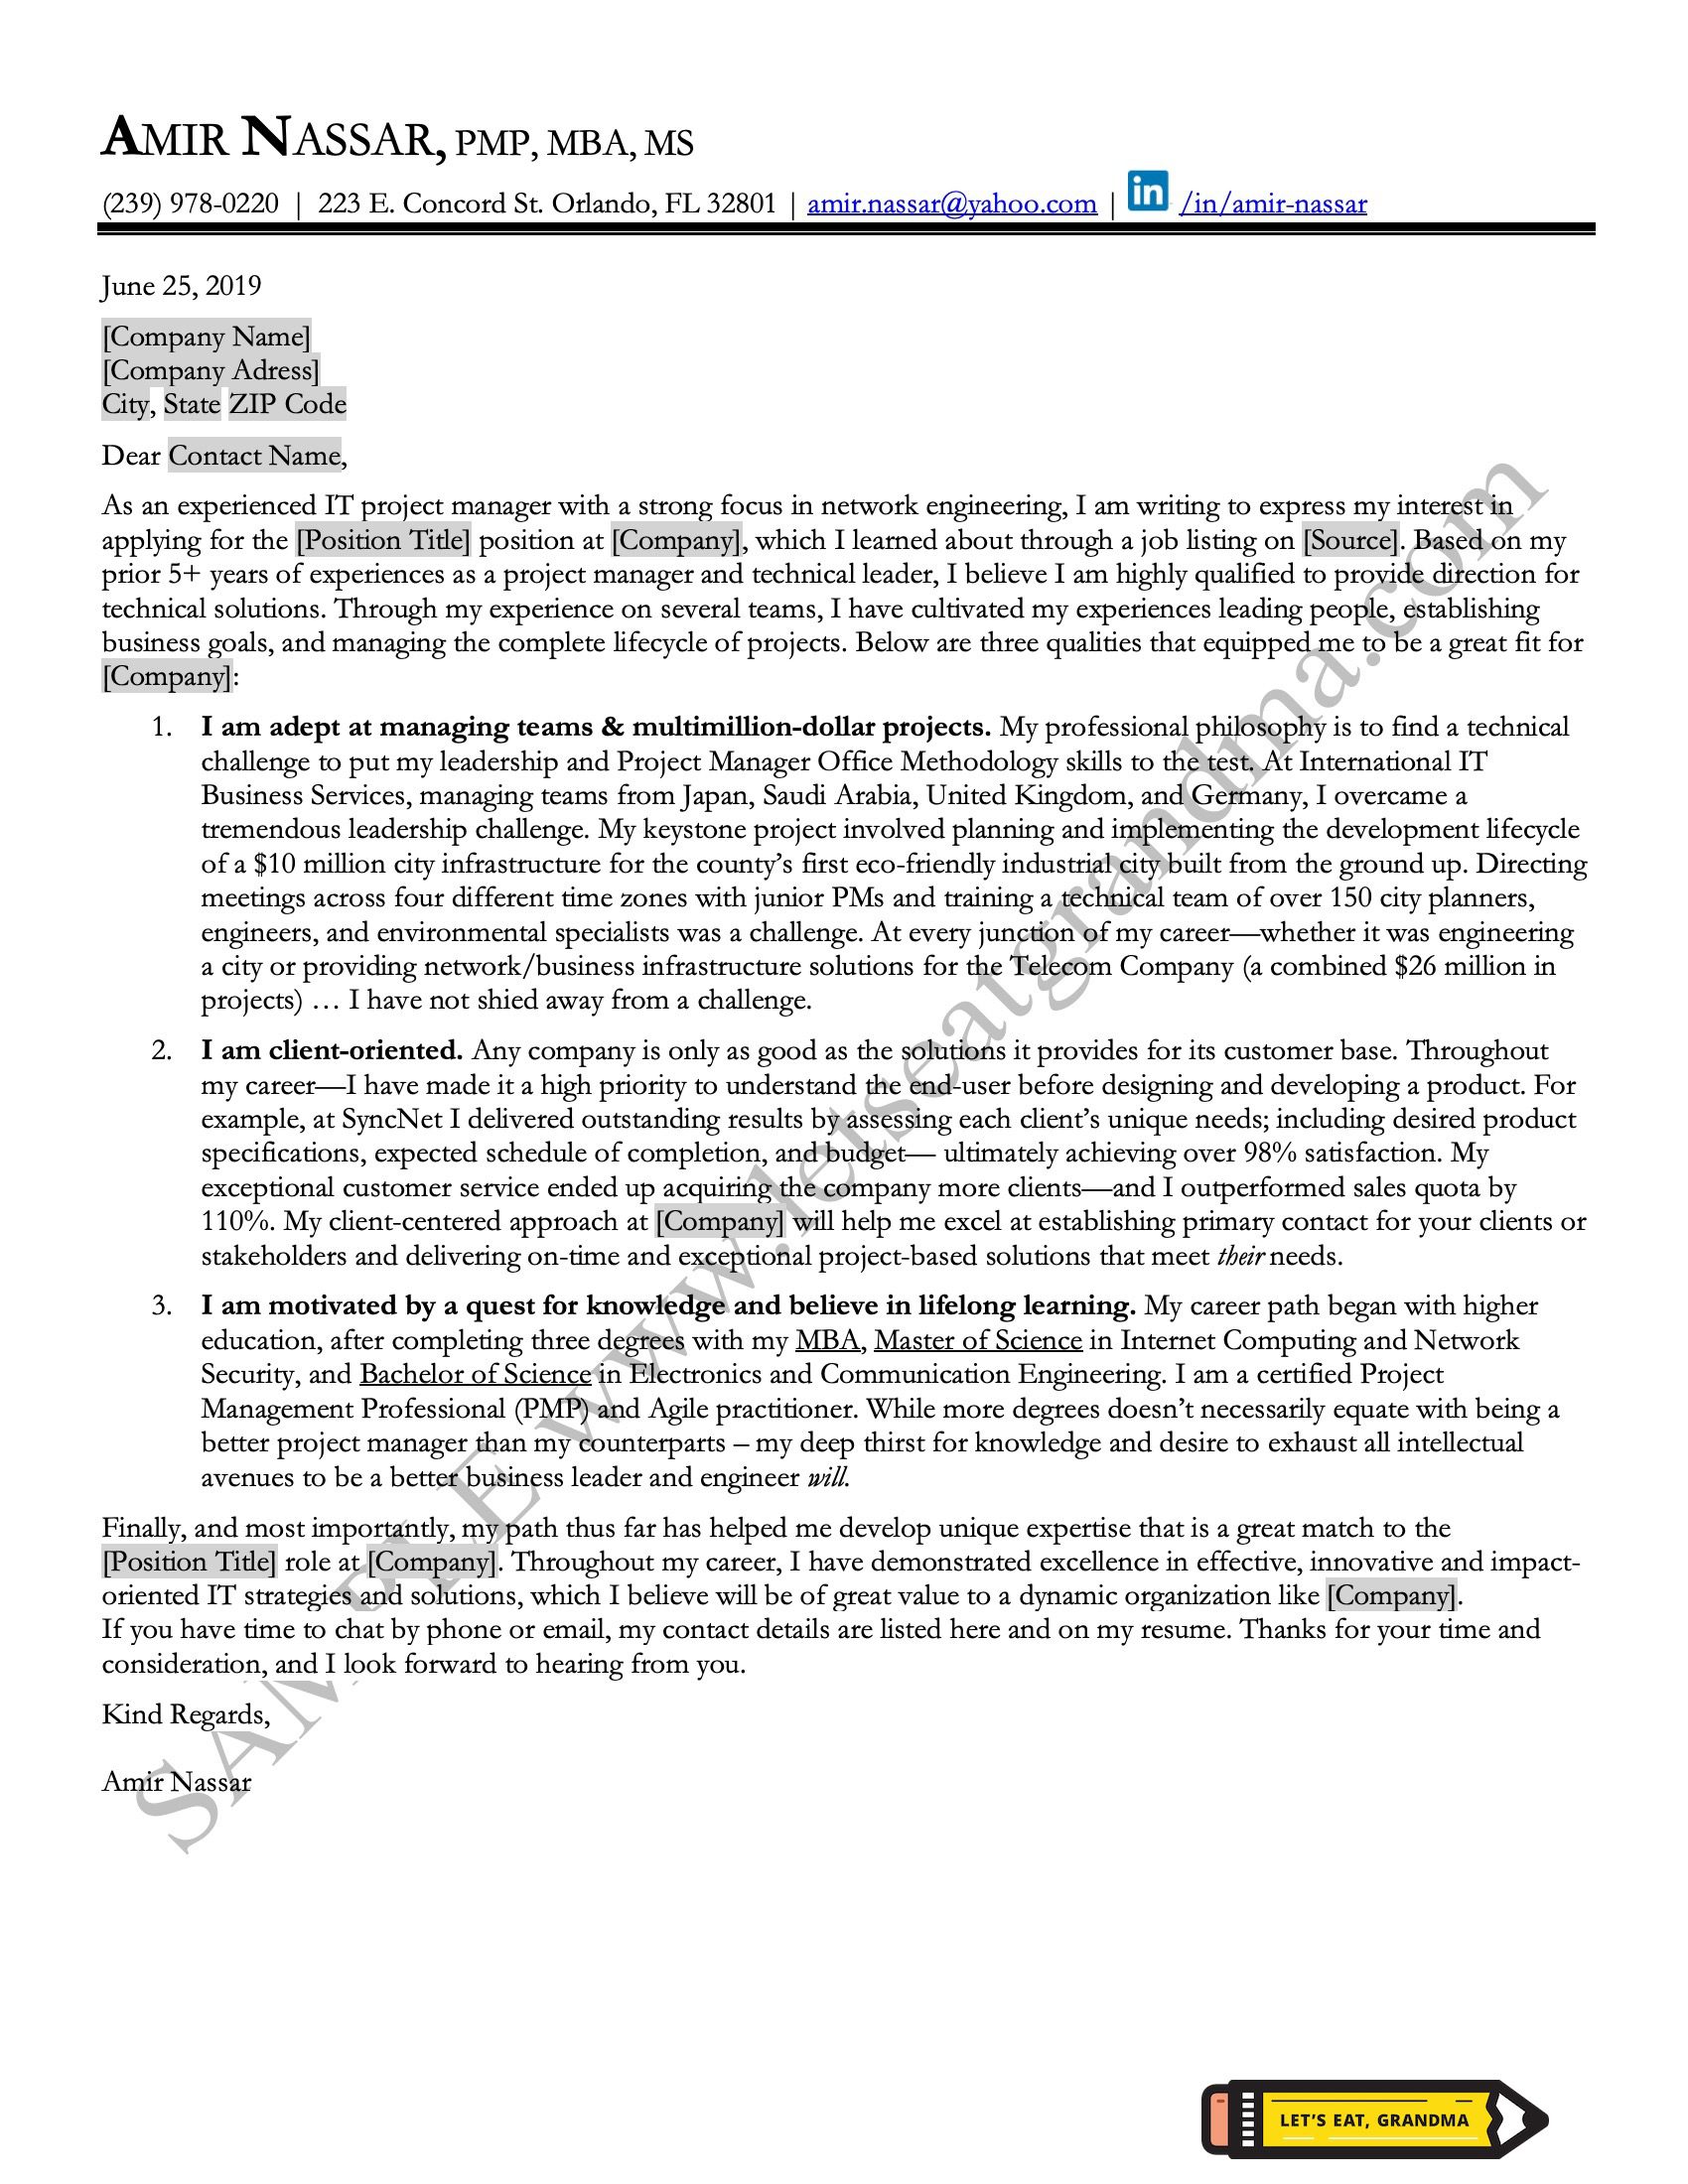 Resume Cover Letter Examples 2019 from www.letseatgrandma.com